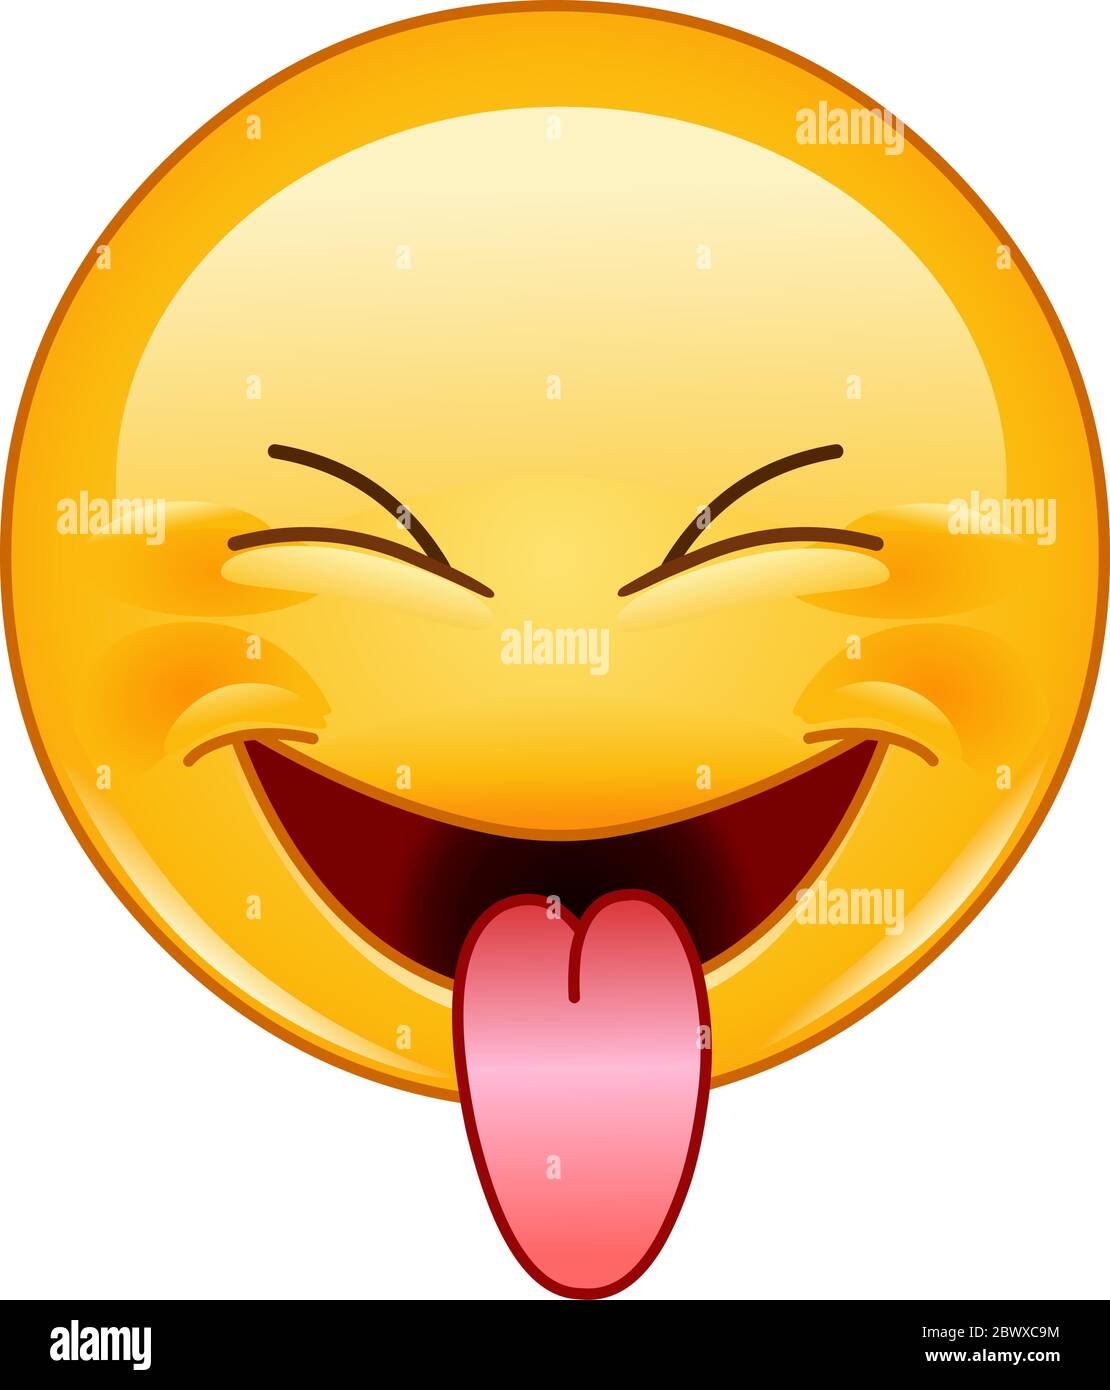 Emoticon with stuck out tongue and tightly closed eyes Stock Vector